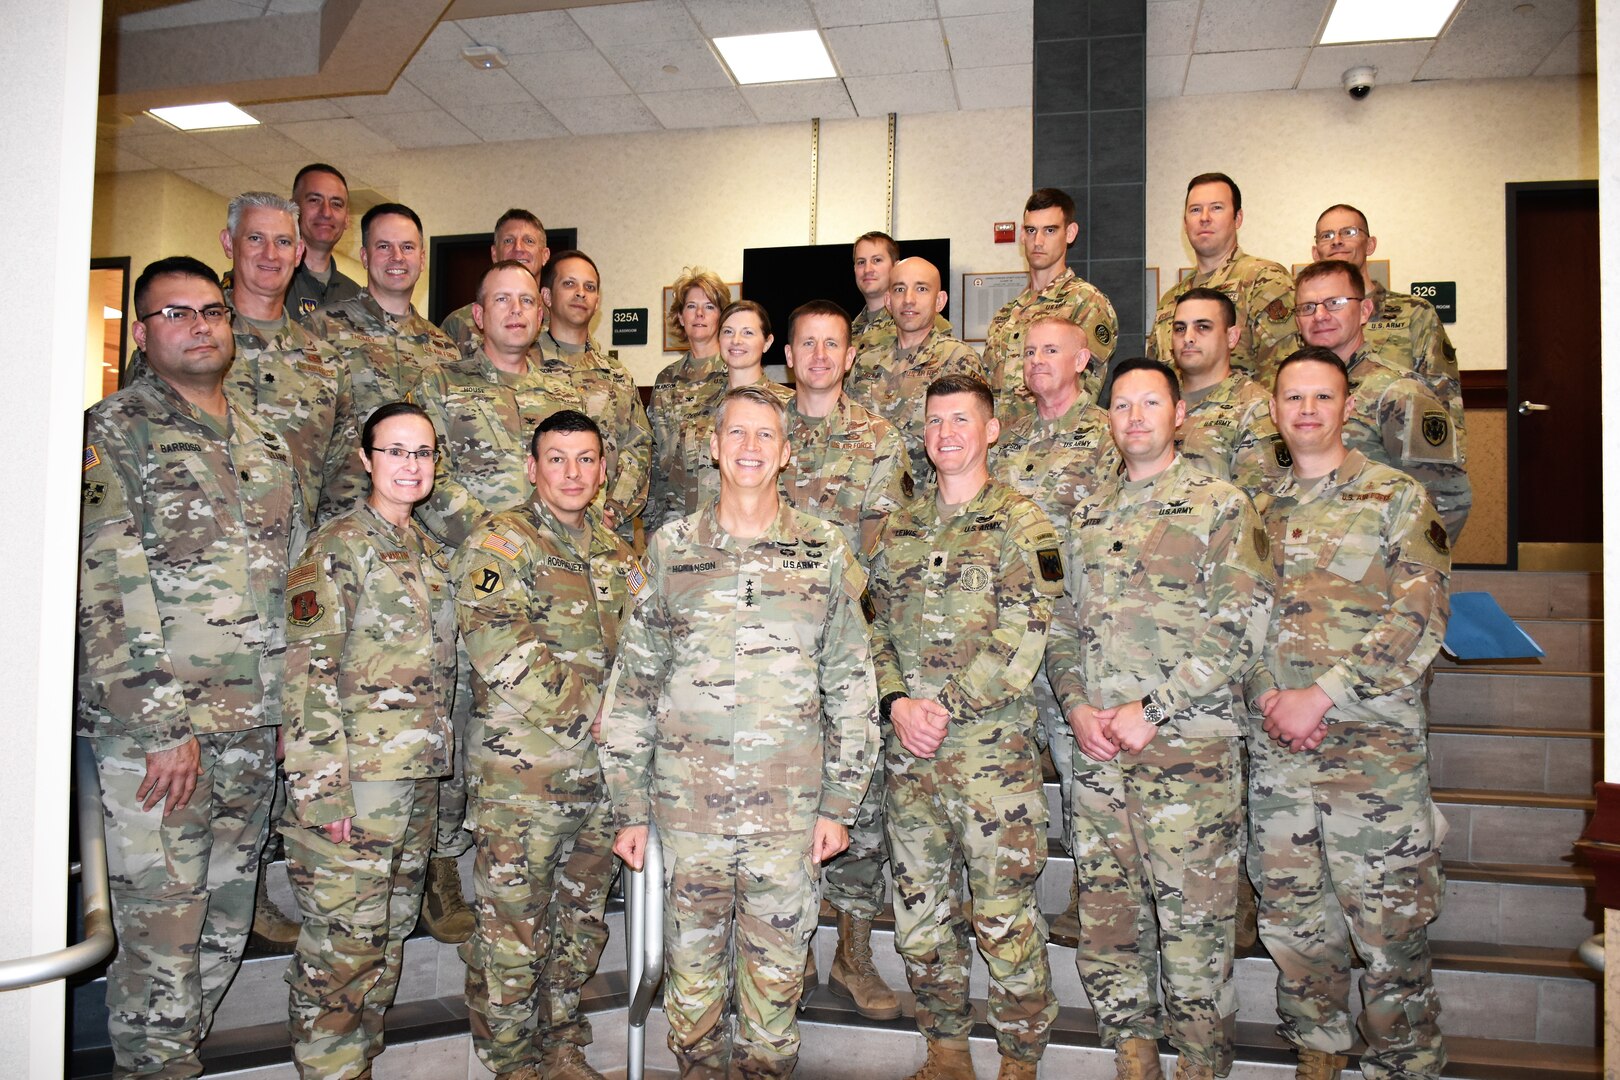 General Hokanson with National Guard JFSC students and faculty following a small-group discussion.